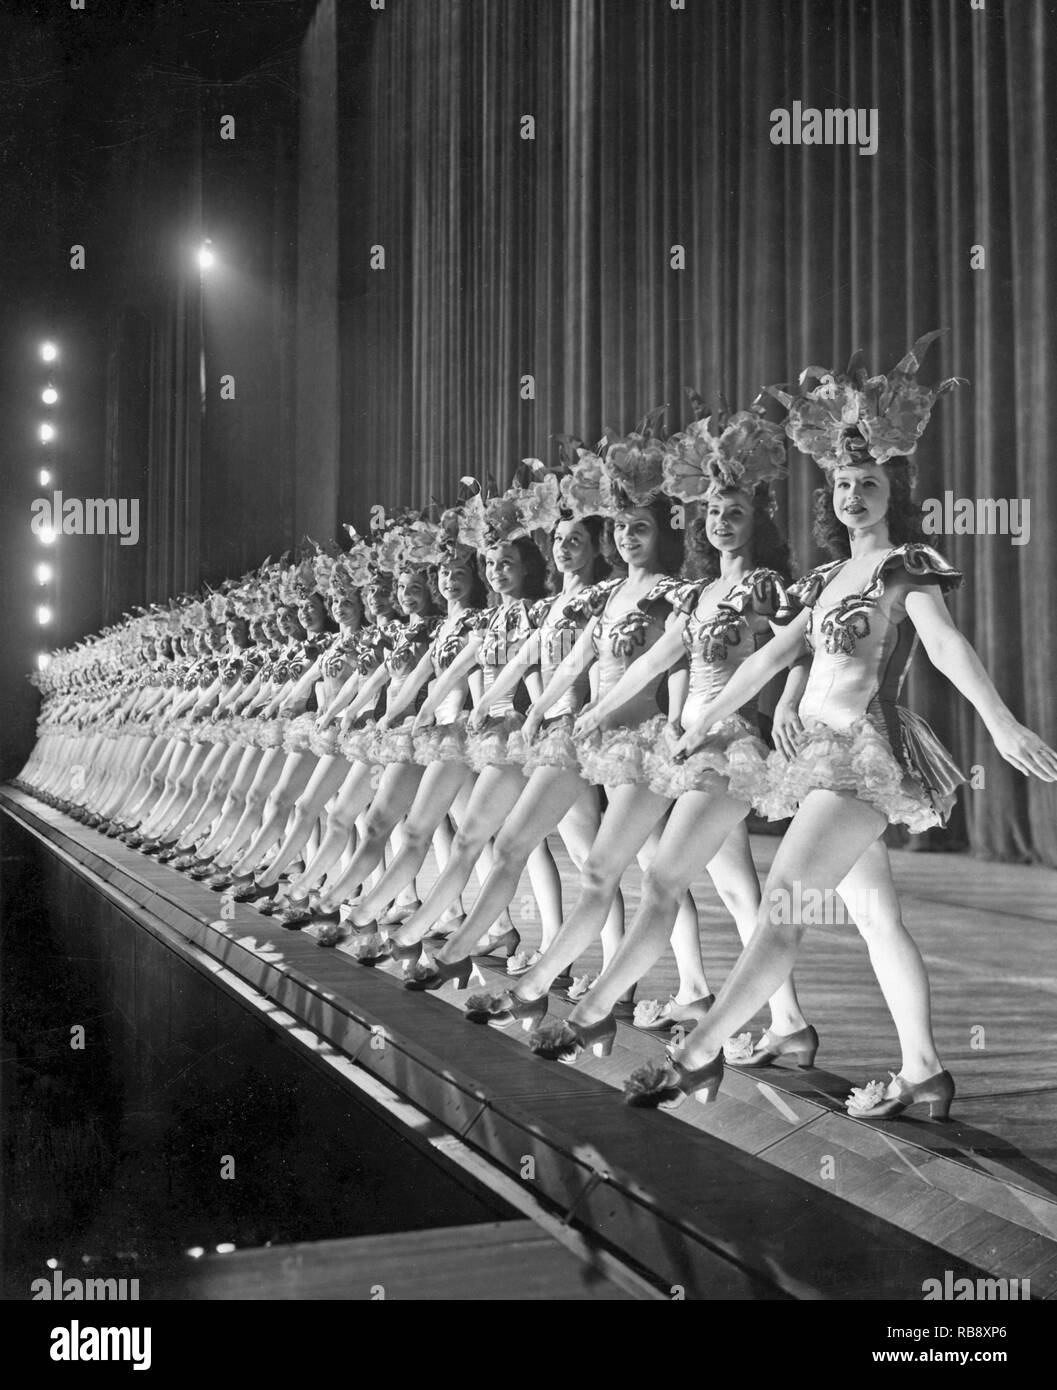 Ballet girls in New York. A long line of dancing girls on stage at Radio City Music Hall in New York are moving together synchronized to the music. 1940s Stock Photo